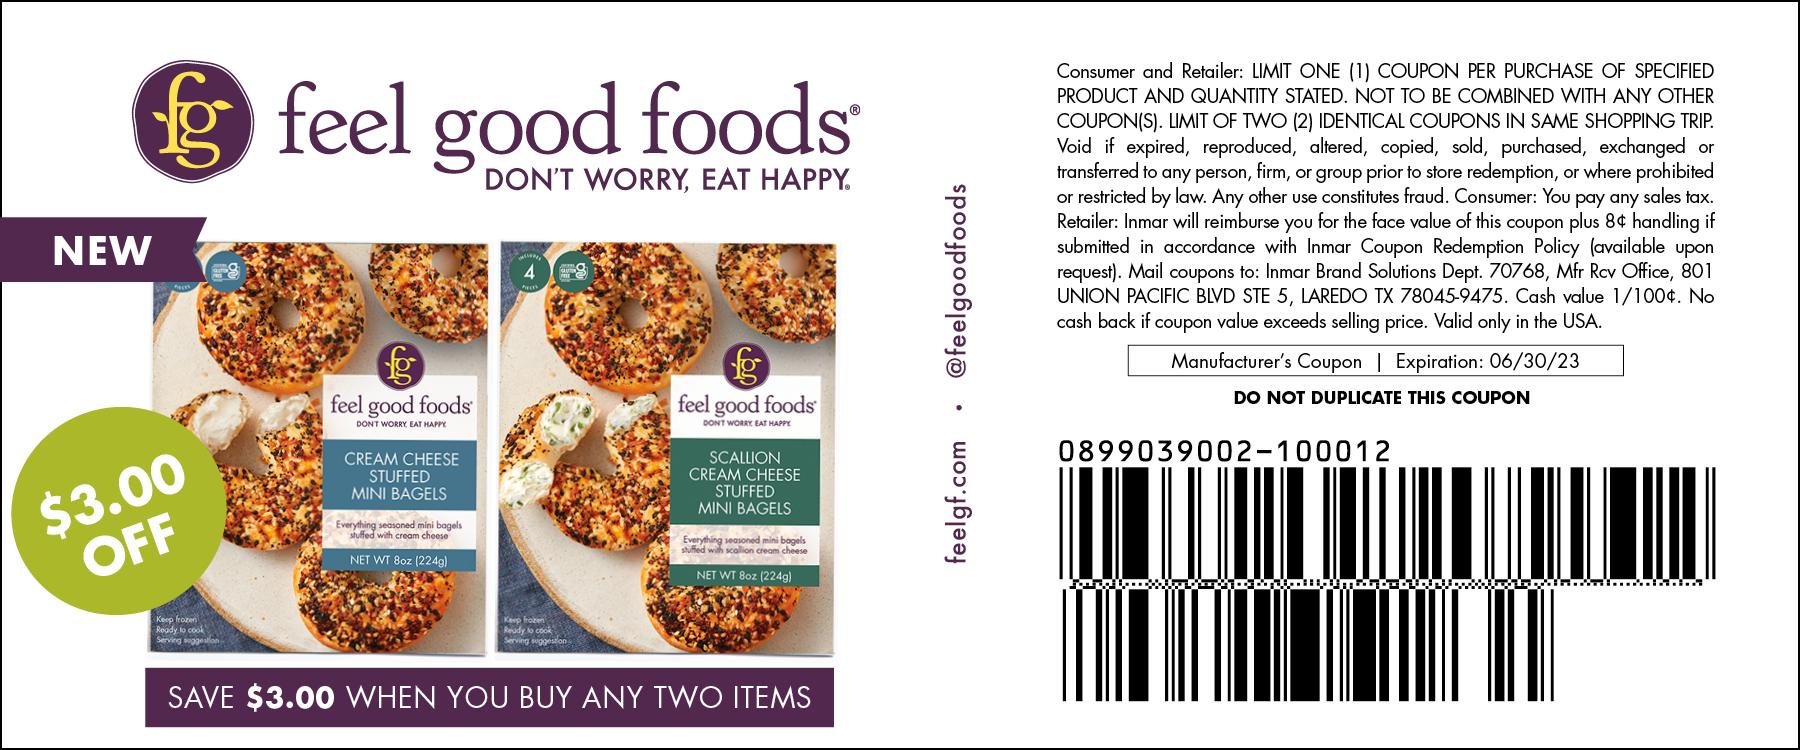 Feel Good Foods - $3.00 off any two items coupon